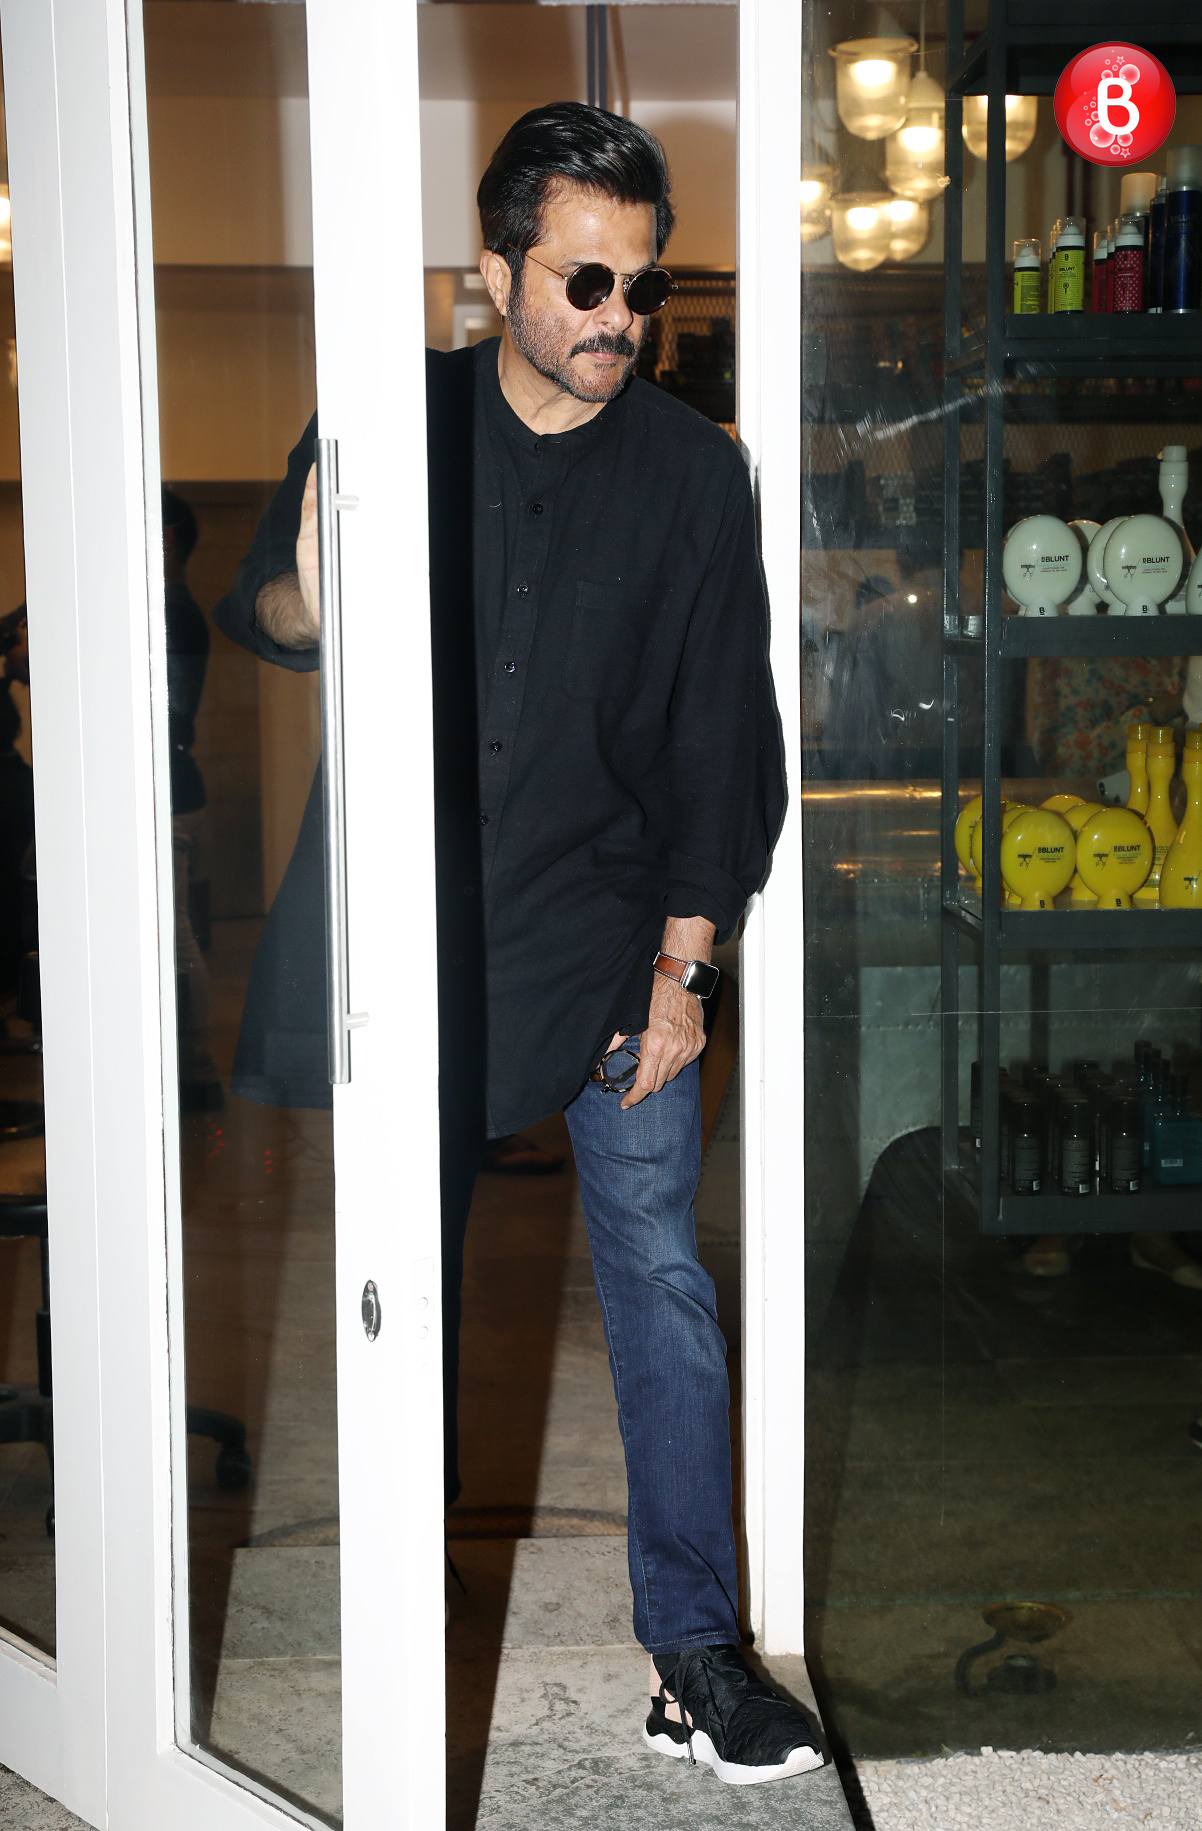 Anil Kapoor’s pictures with his new beard look